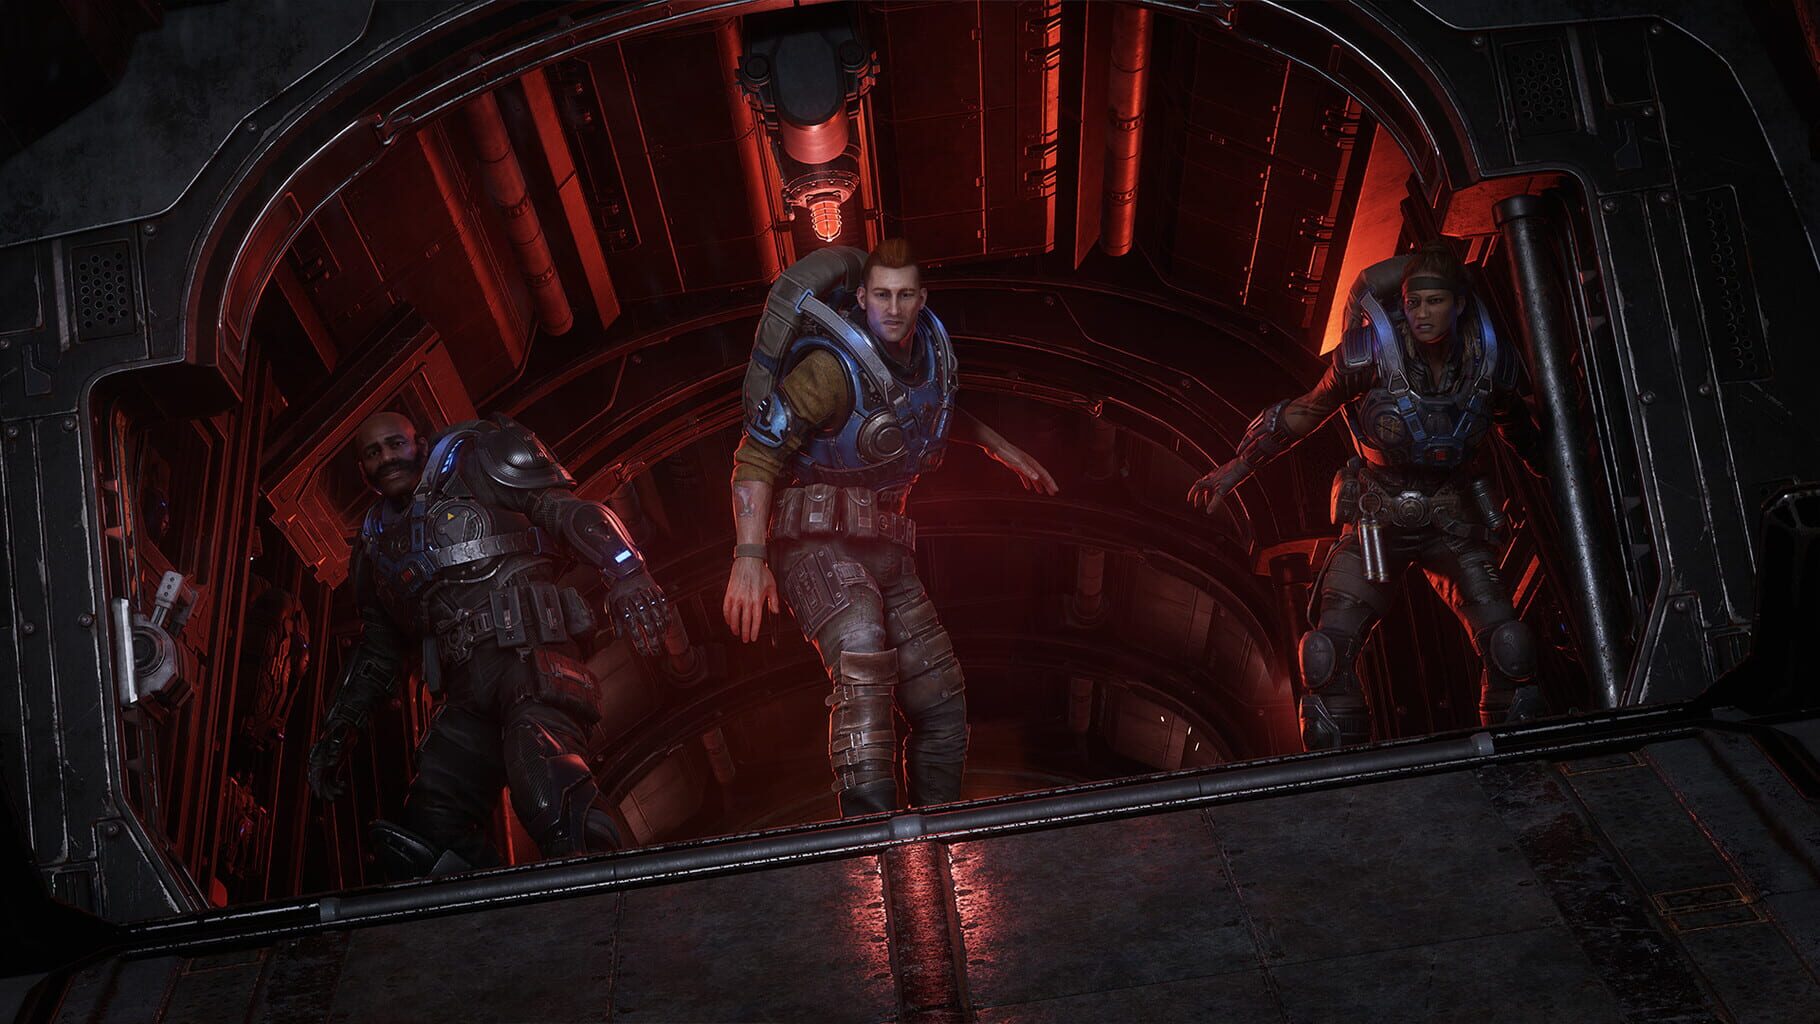 Gears 5: Hivebusters Image